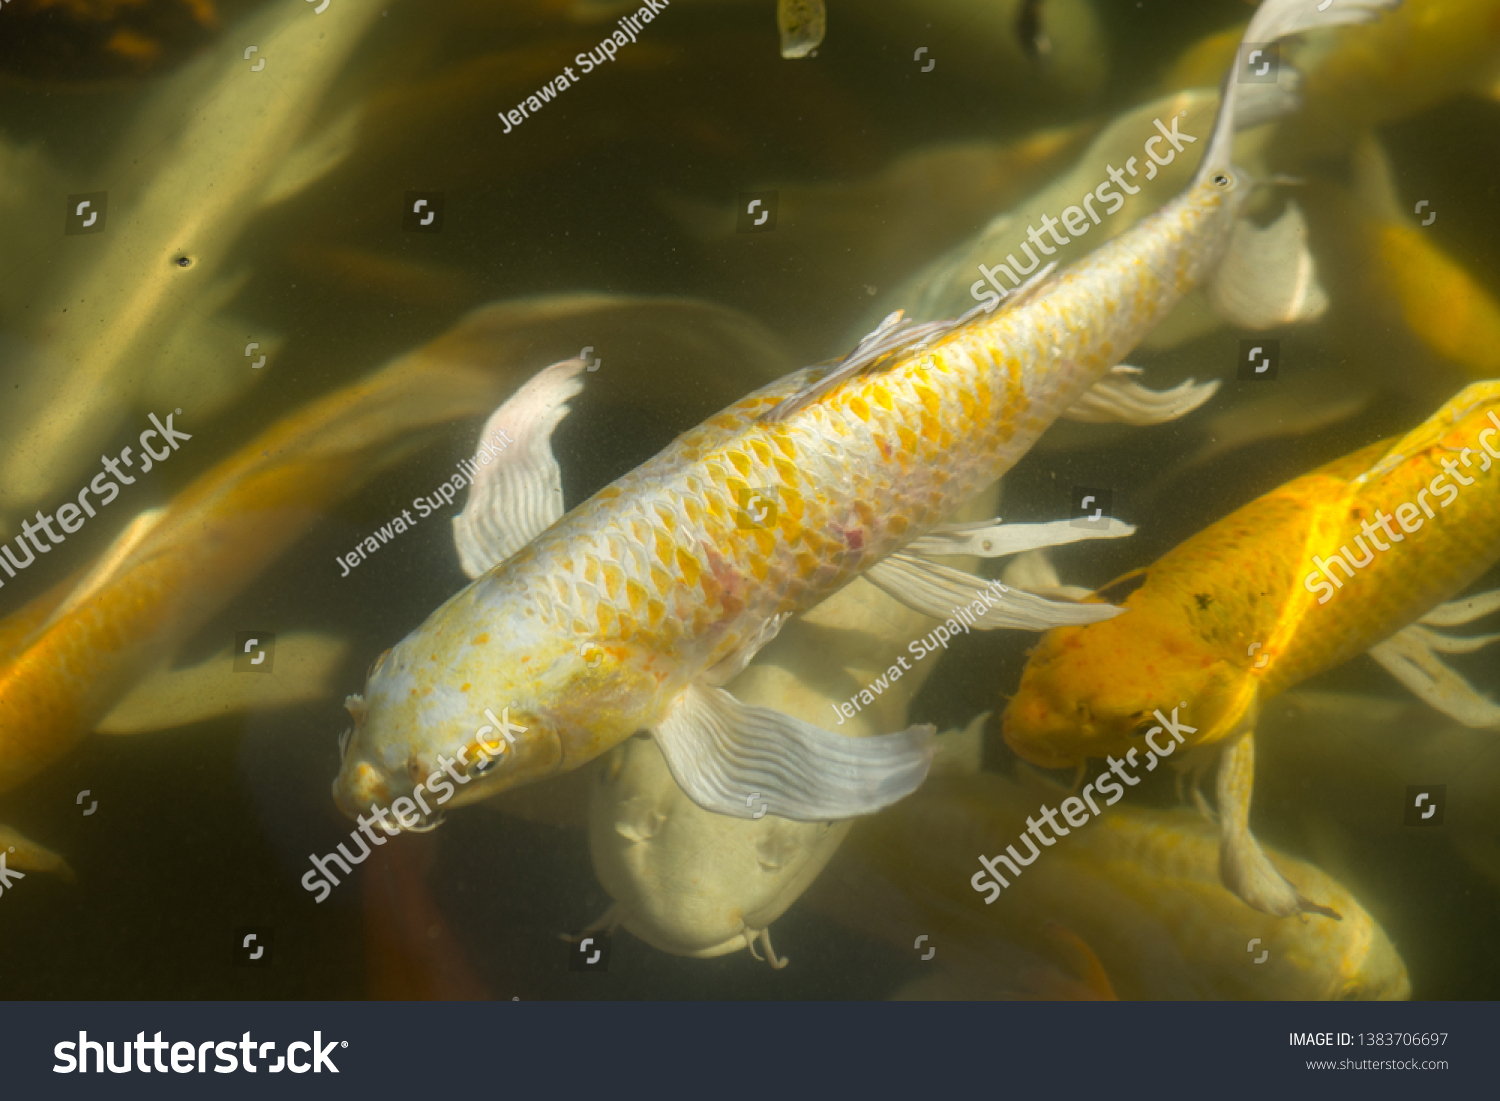 Fancy carp swimming in a pond. Fancy Carps Fish or Koi Swim in Pond, Movement of Swimming and Space. #1383706697